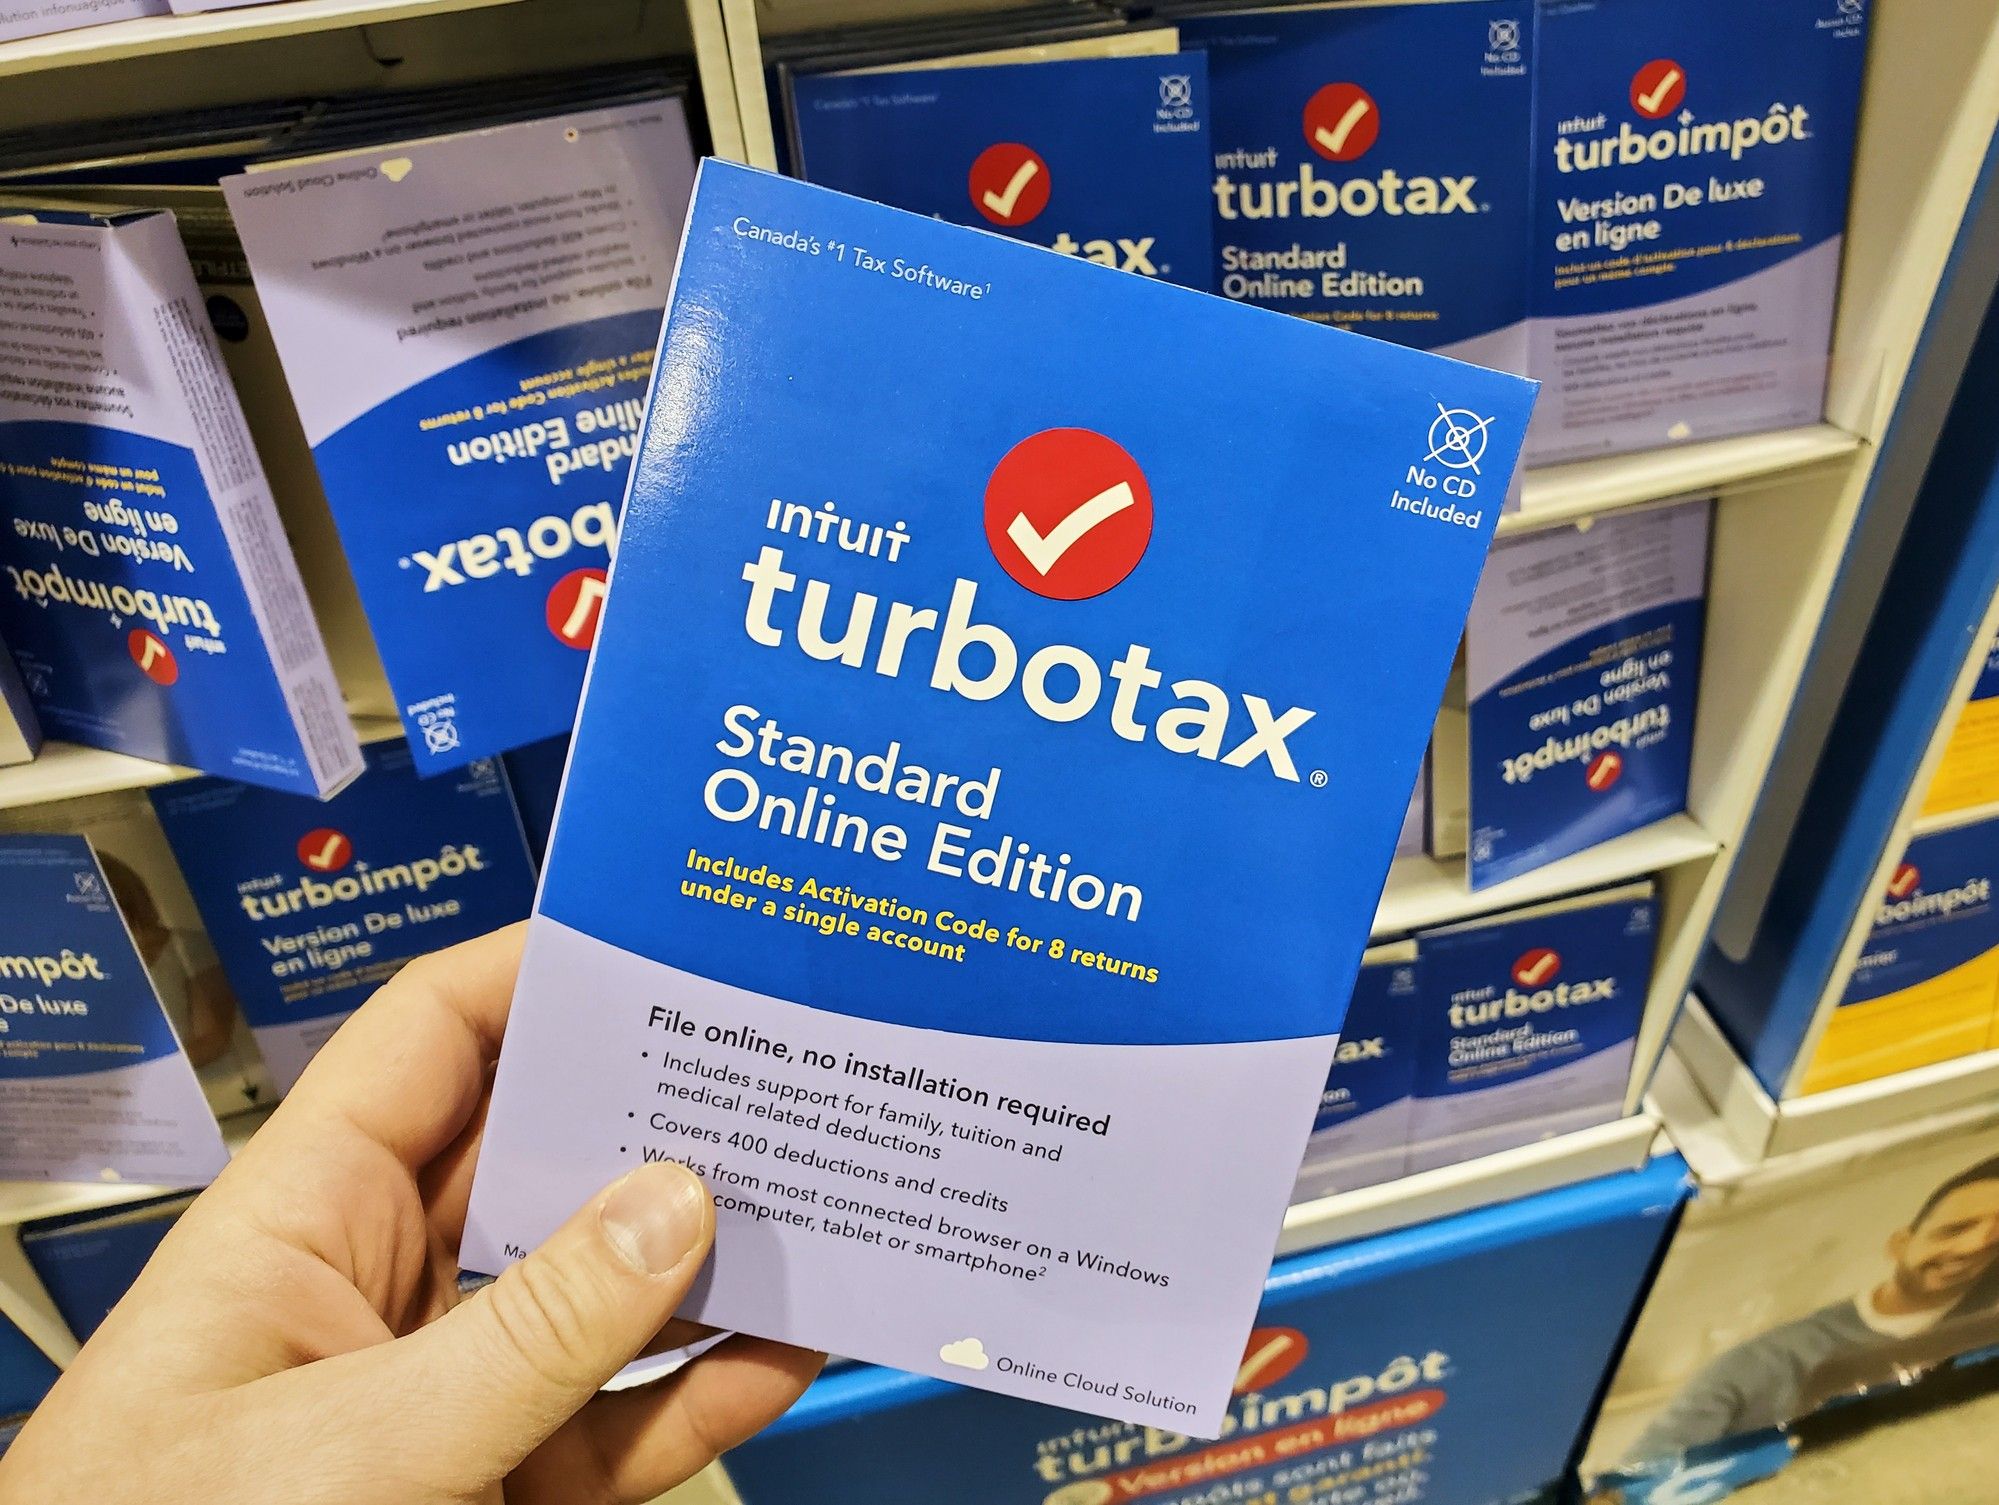 turbotax-class-action-lawsuit-settlement-reached-over-whether-its